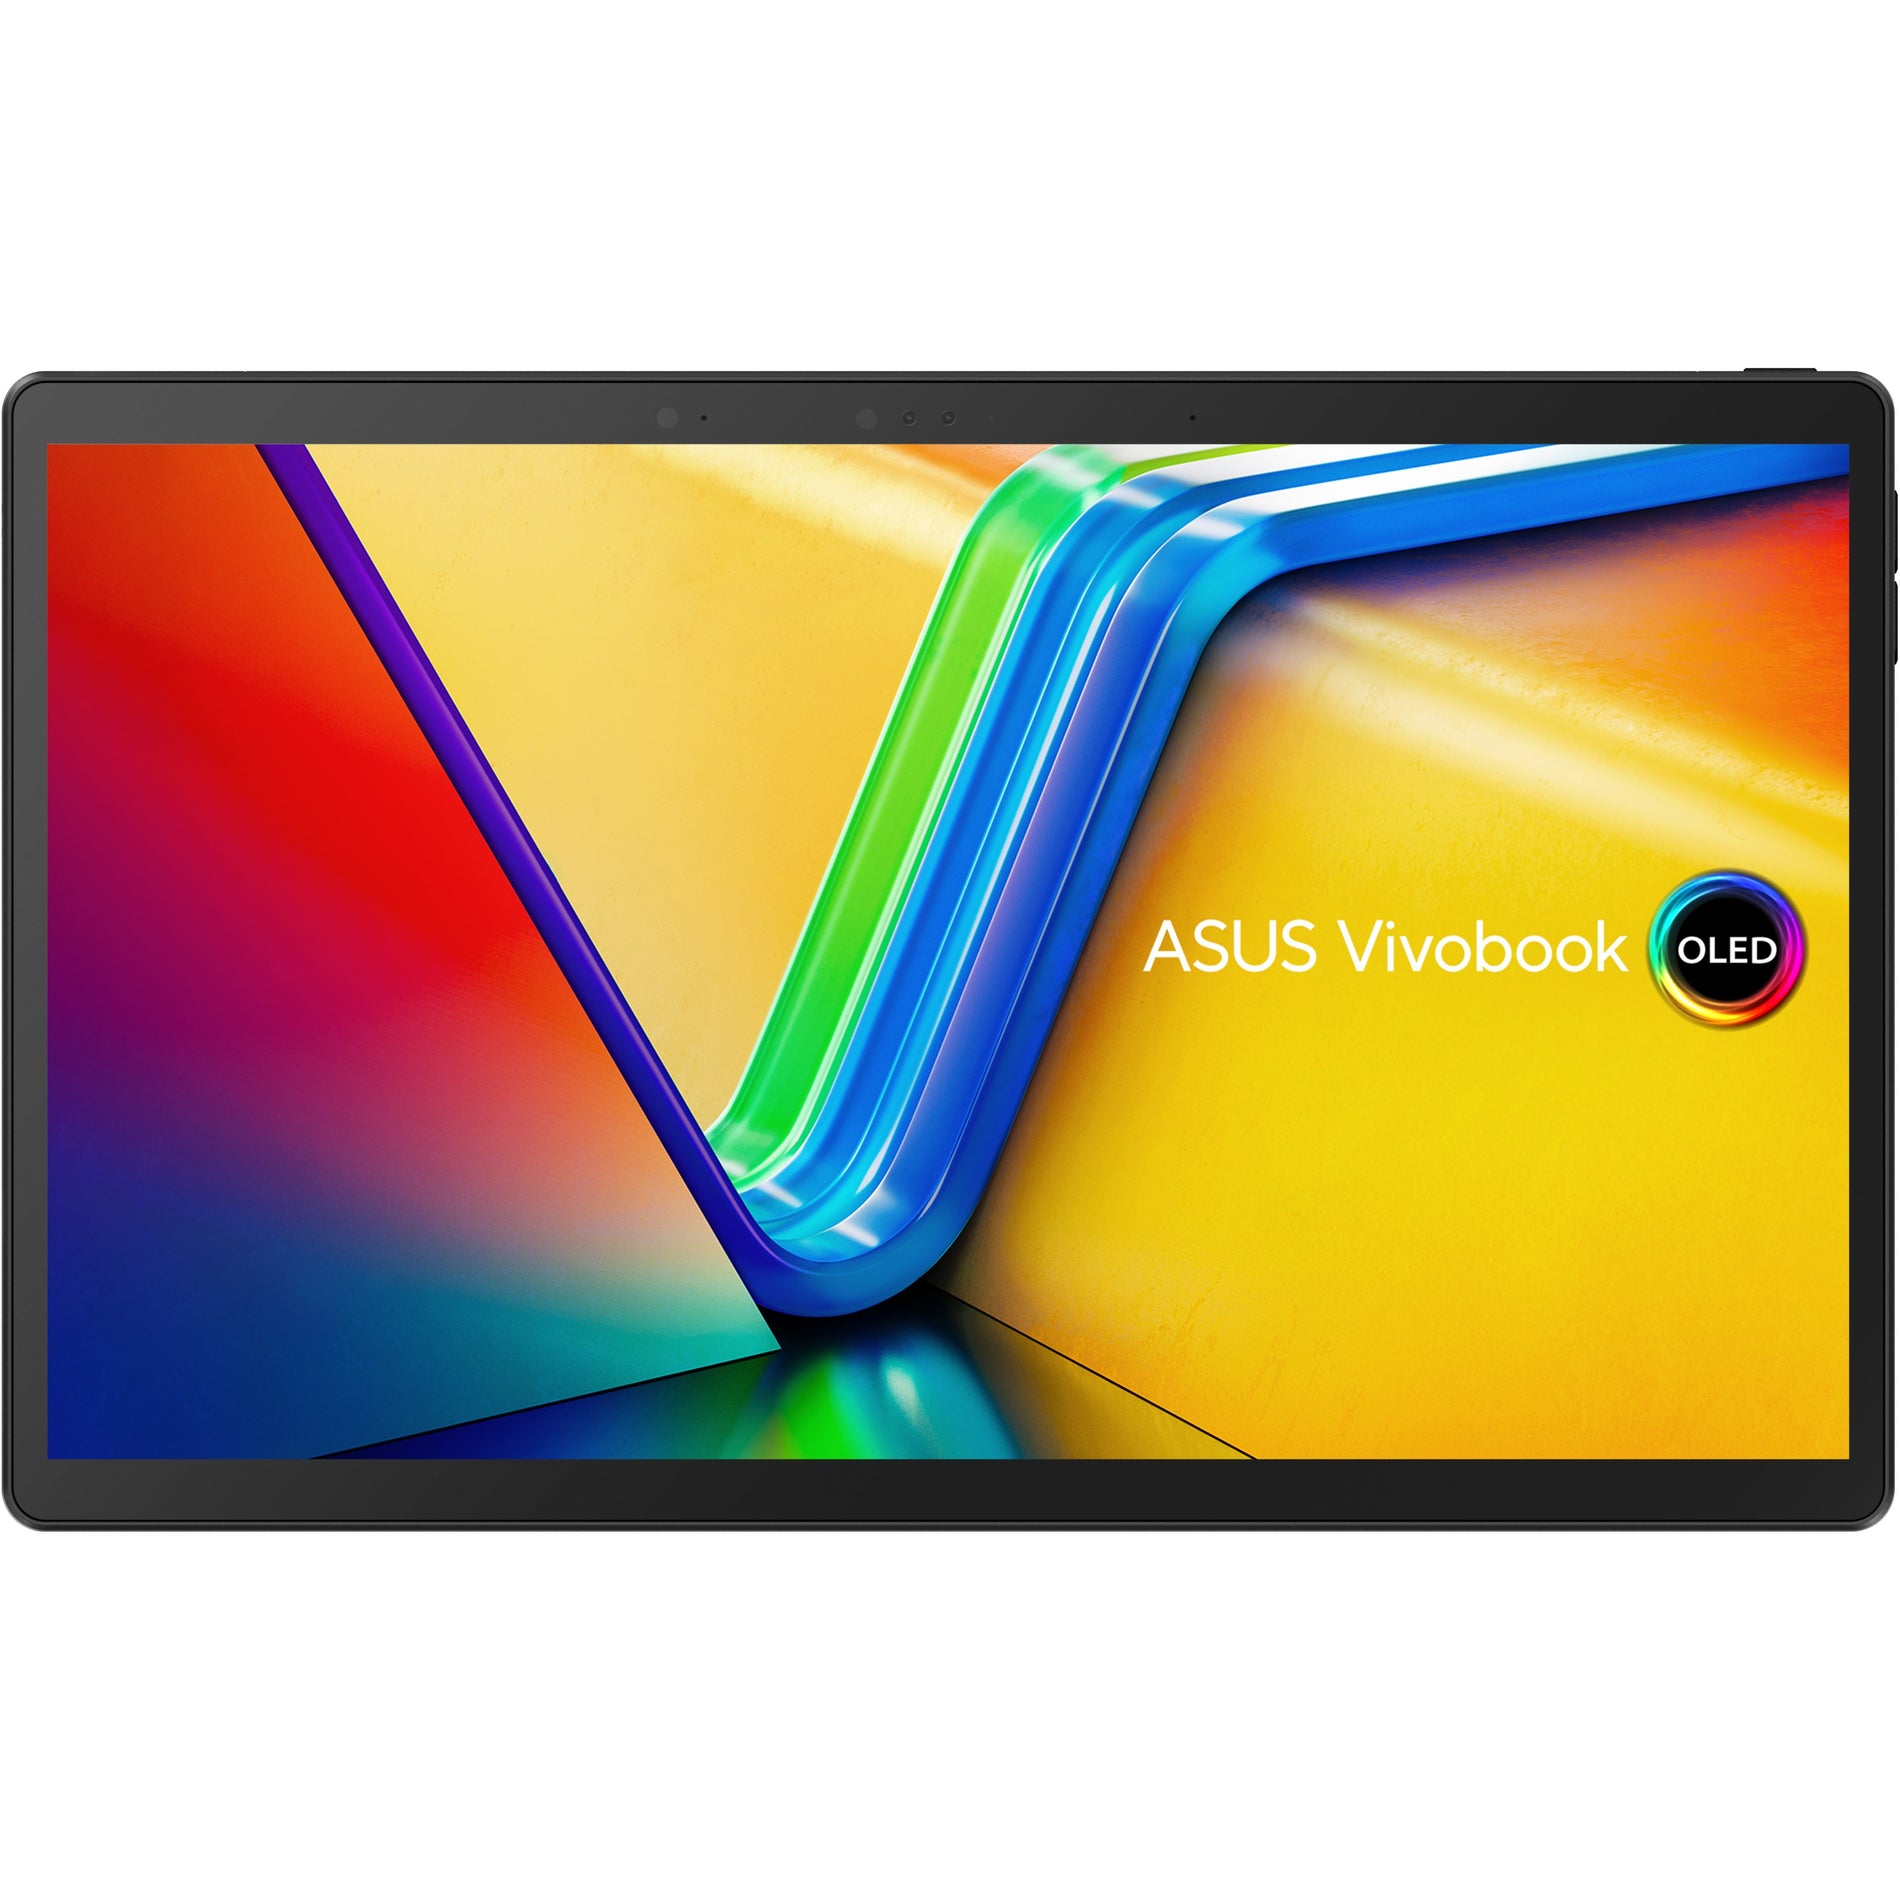 Asus Vivobook 13 Slate OLED T3304GA-DS34T 2 in 1 Notebook, 13.3" Full HD OLED Touchscreen, Intel Core i3, 8GB RAM, 256GB SSD, Windows 11 Home in S mode